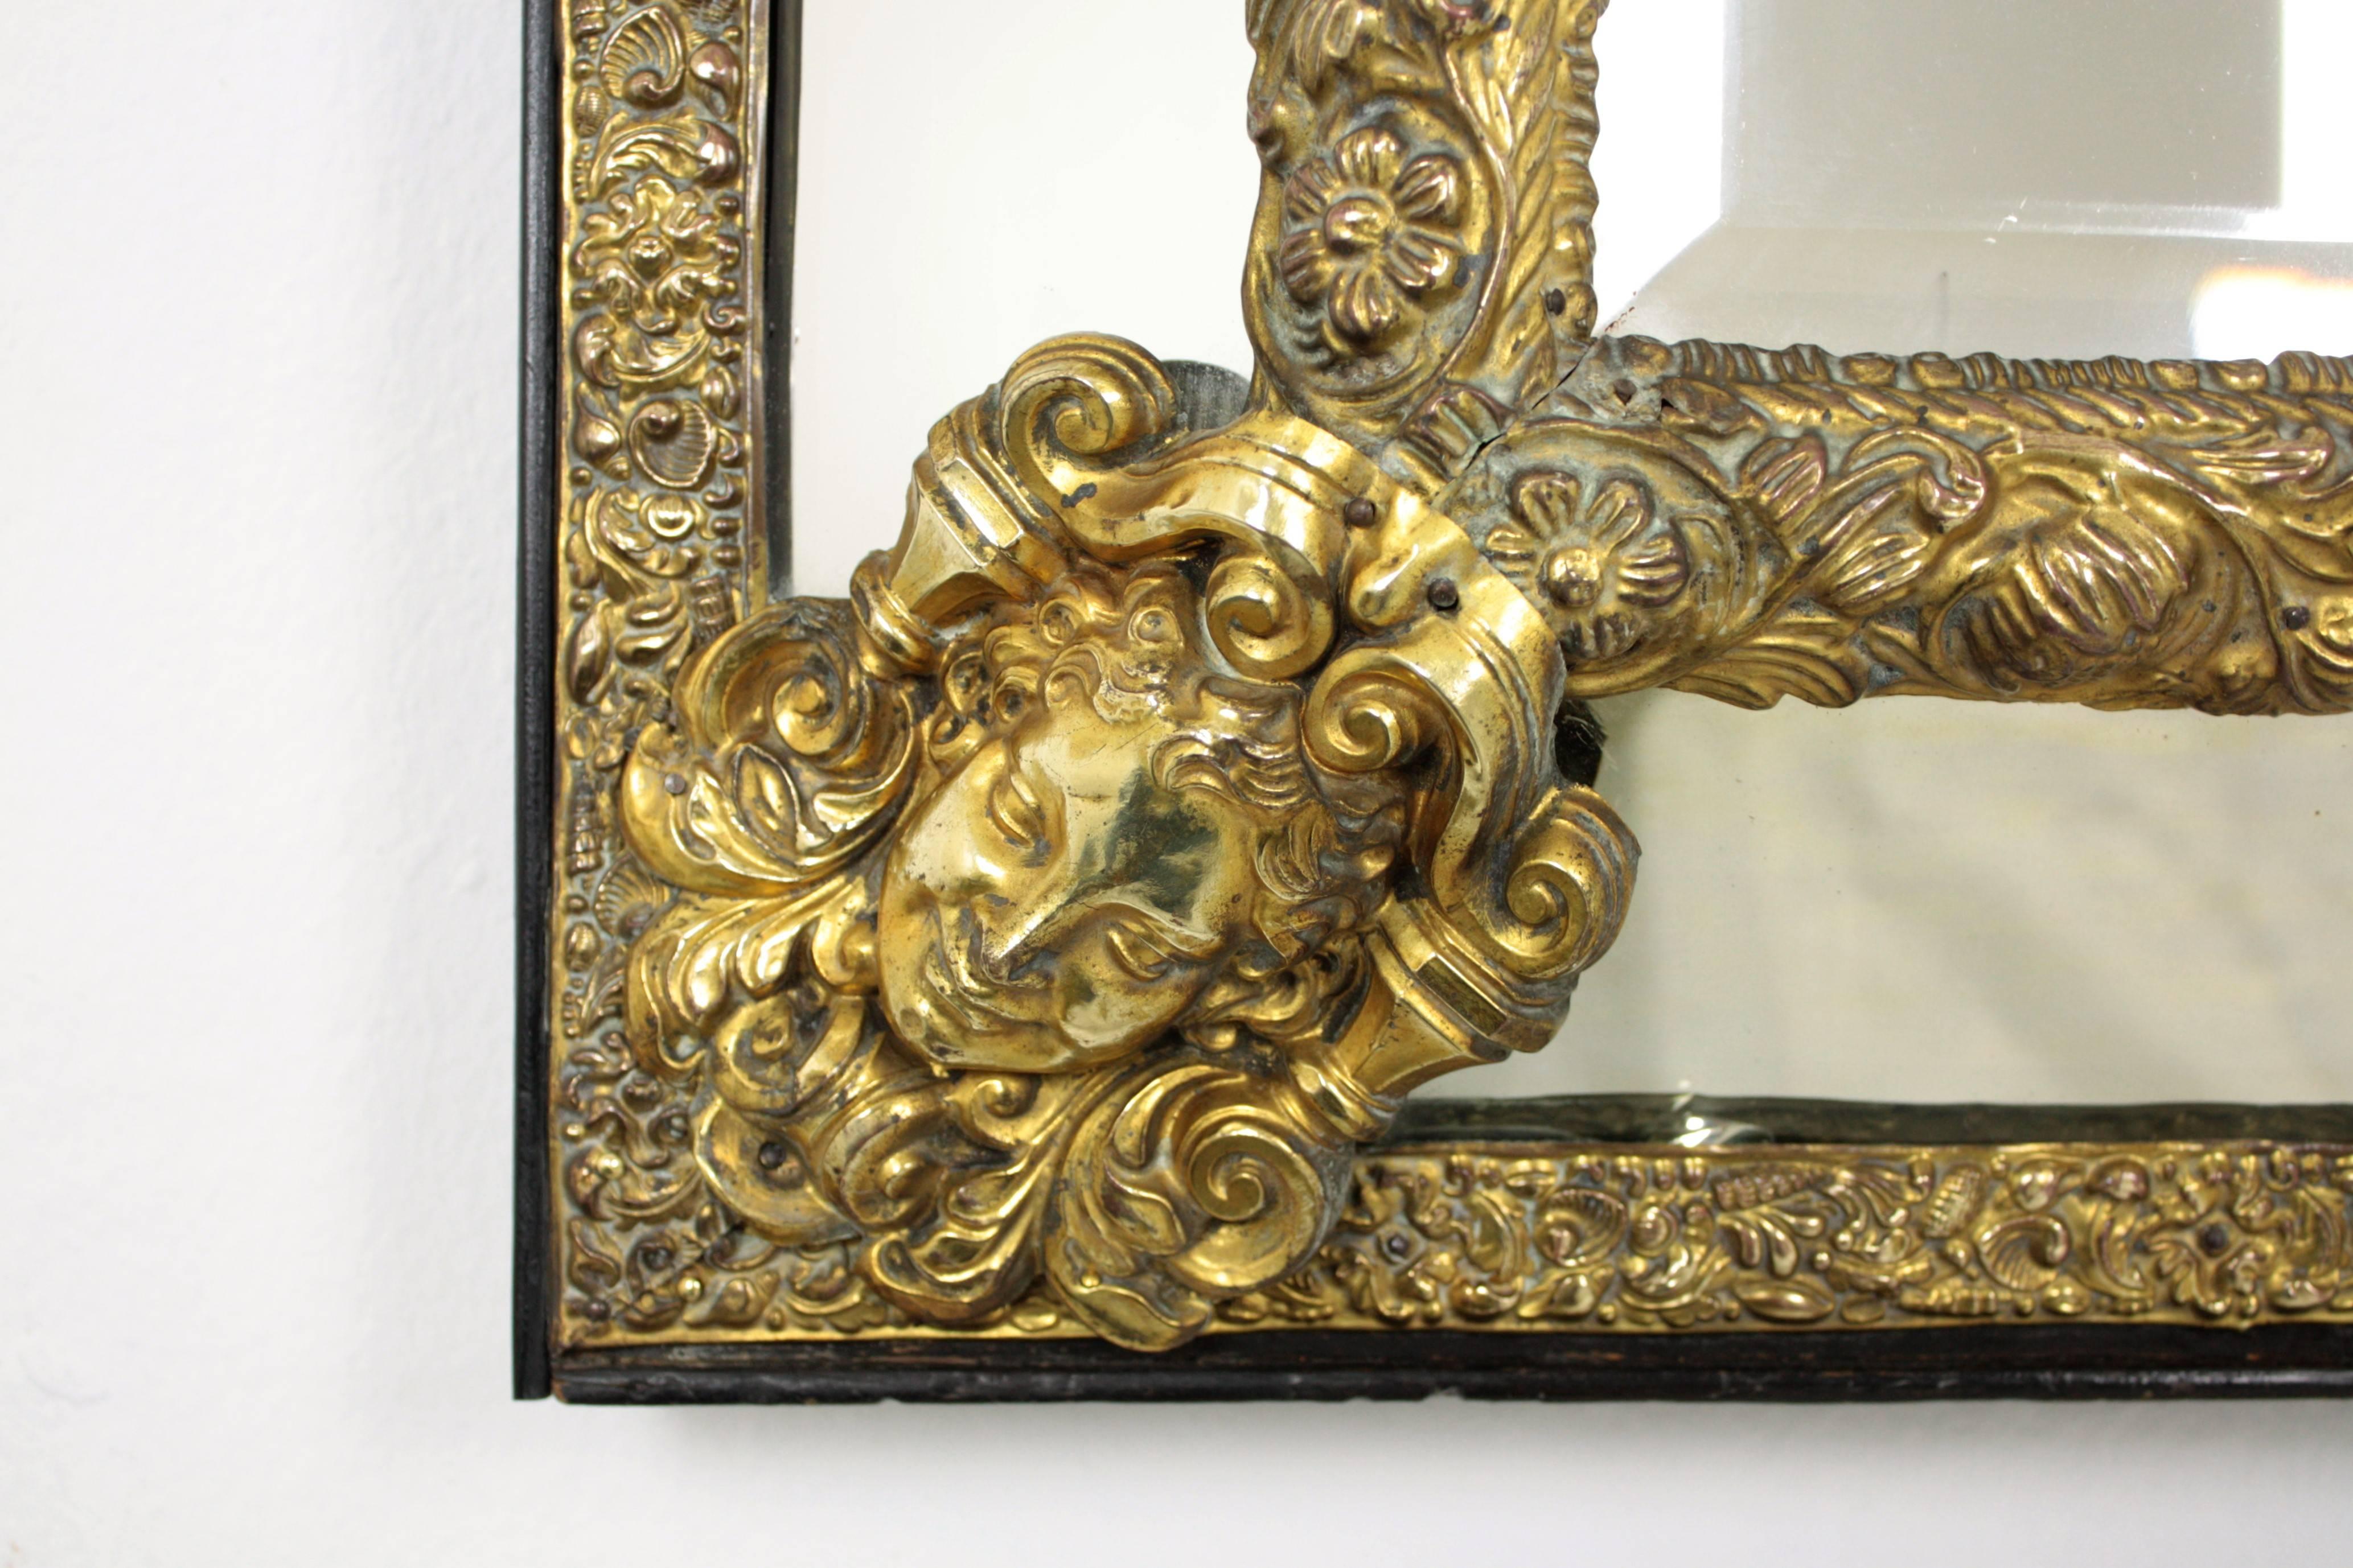 An elegant Napoleon III period mirror made with central beveled glass and four rectangular glasses joined between them by decorative brass repousse floral patterns, an elegant filigree repousse brass crest and scupltural faces adorning the